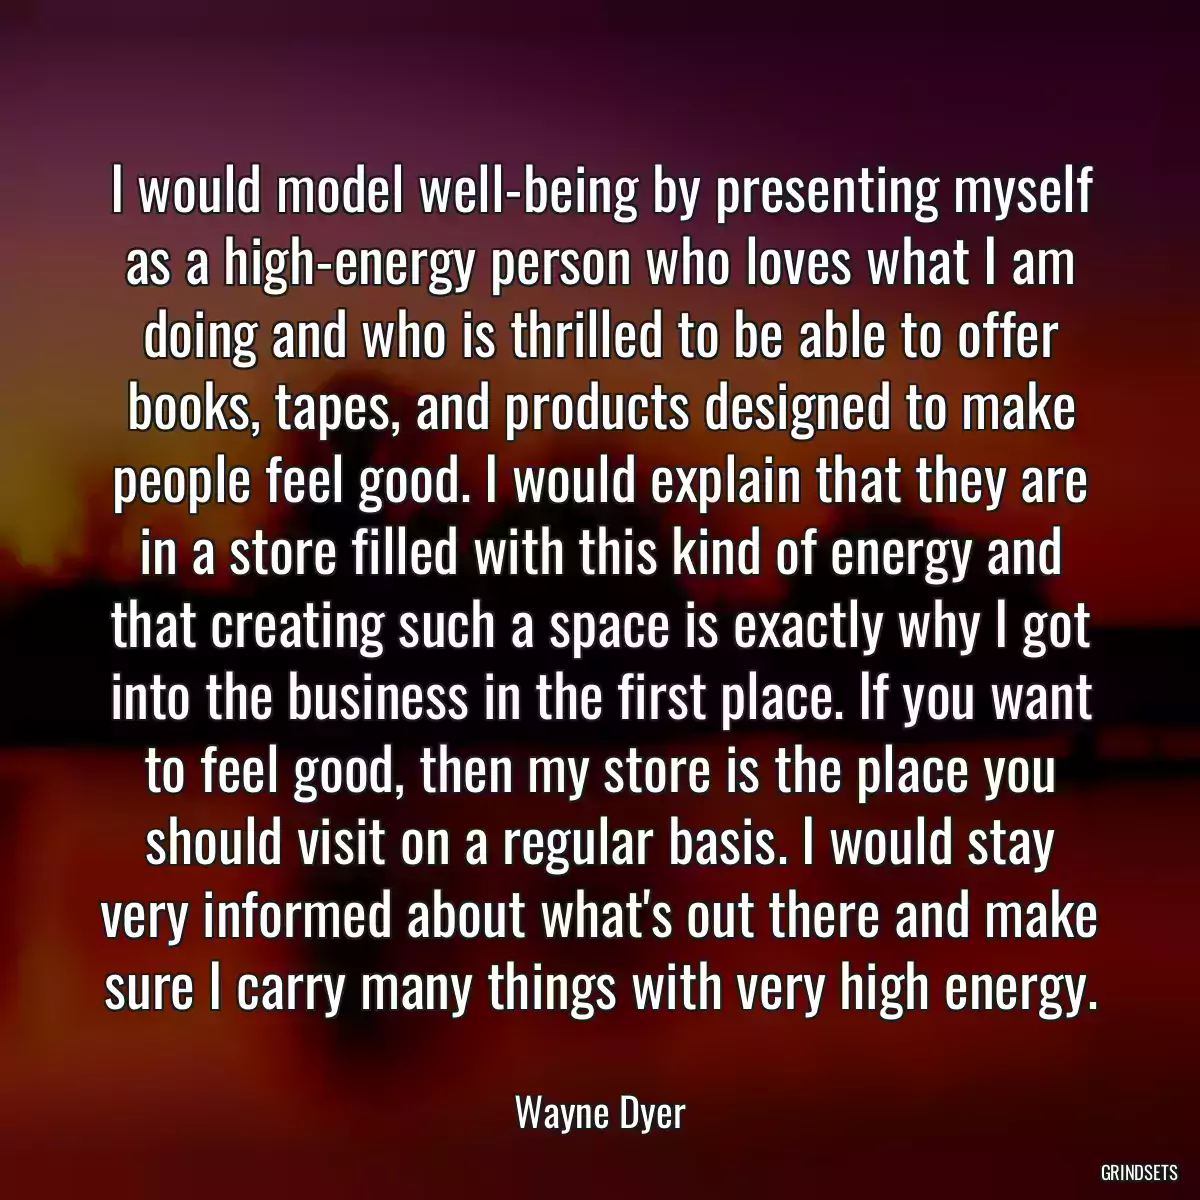 I would model well-being by presenting myself as a high-energy person who loves what I am doing and who is thrilled to be able to offer books, tapes, and products designed to make people feel good. I would explain that they are in a store filled with this kind of energy and that creating such a space is exactly why I got into the business in the first place. If you want to feel good, then my store is the place you should visit on a regular basis. I would stay very informed about what\'s out there and make sure I carry many things with very high energy.